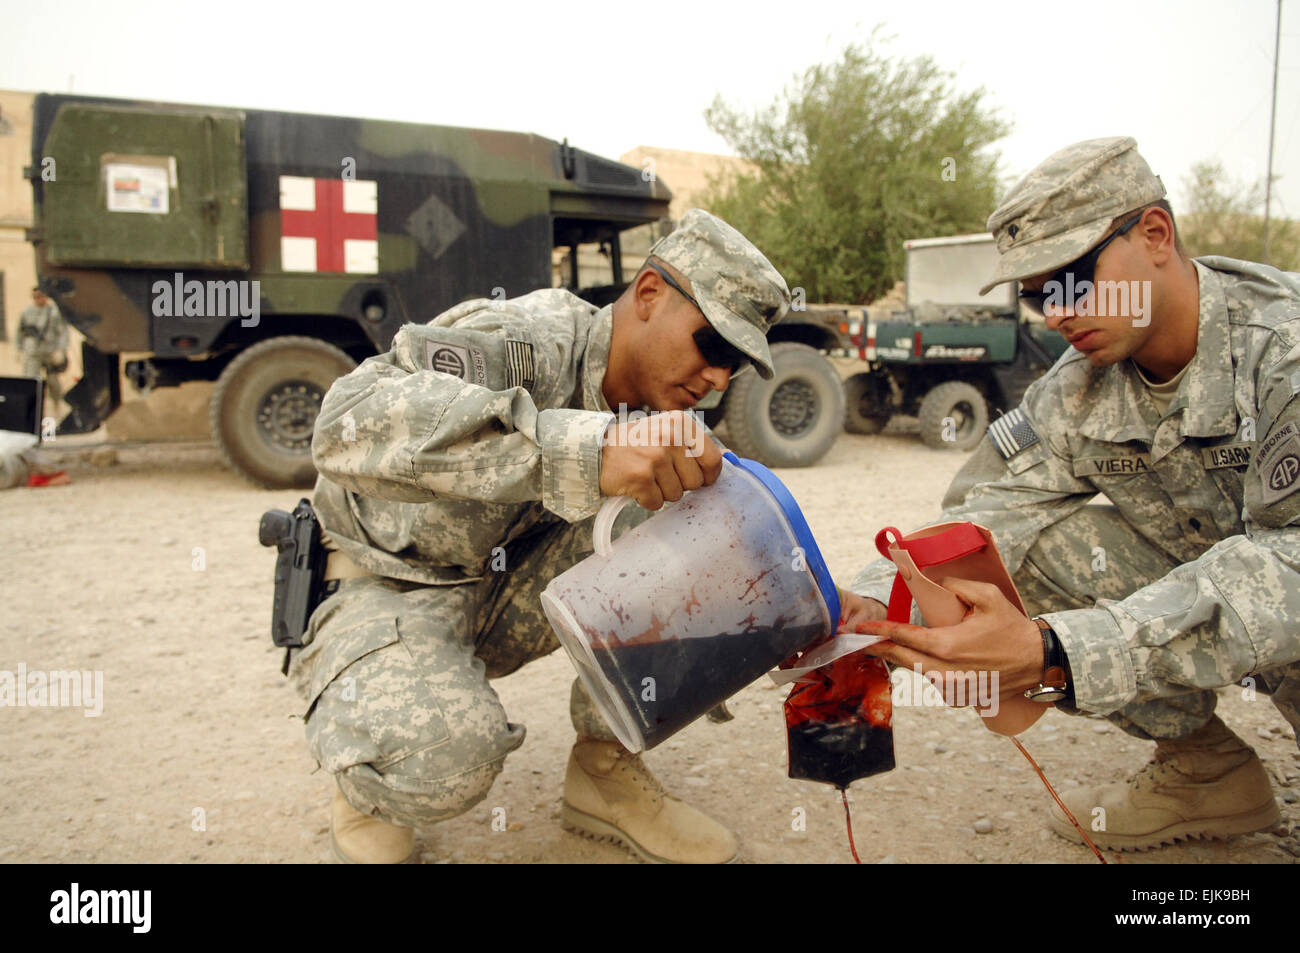 U.S. Army Sgt. Joel Ruiz, left, and Spc. Osniel Viera, both from the 82nd Sustainment Brigade out of Camp Adder, Iraq, pour fake blood into an intravenous bag during a combat casualty treatment course at Camp Mitica, Iraq, Sept. 11, 2007, for Iraqi police officers from the An Nasiriyah Tactical Support Unit.  Master Sgt. Robert Valenca Released Stock Photo